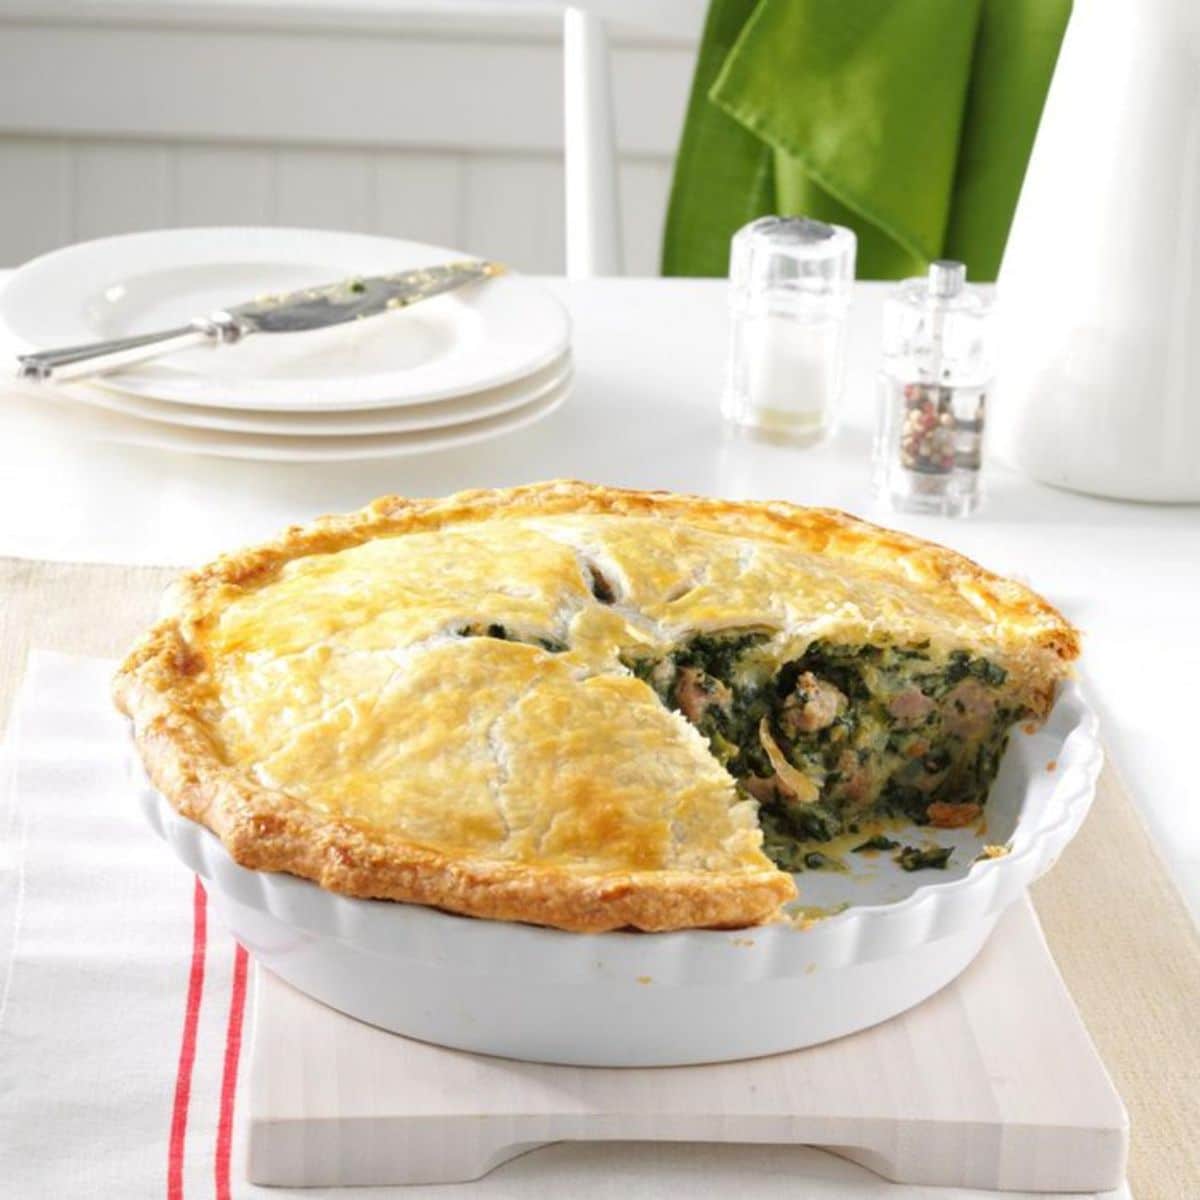 Tasty italian sausage and spinach pie in a white casserole.